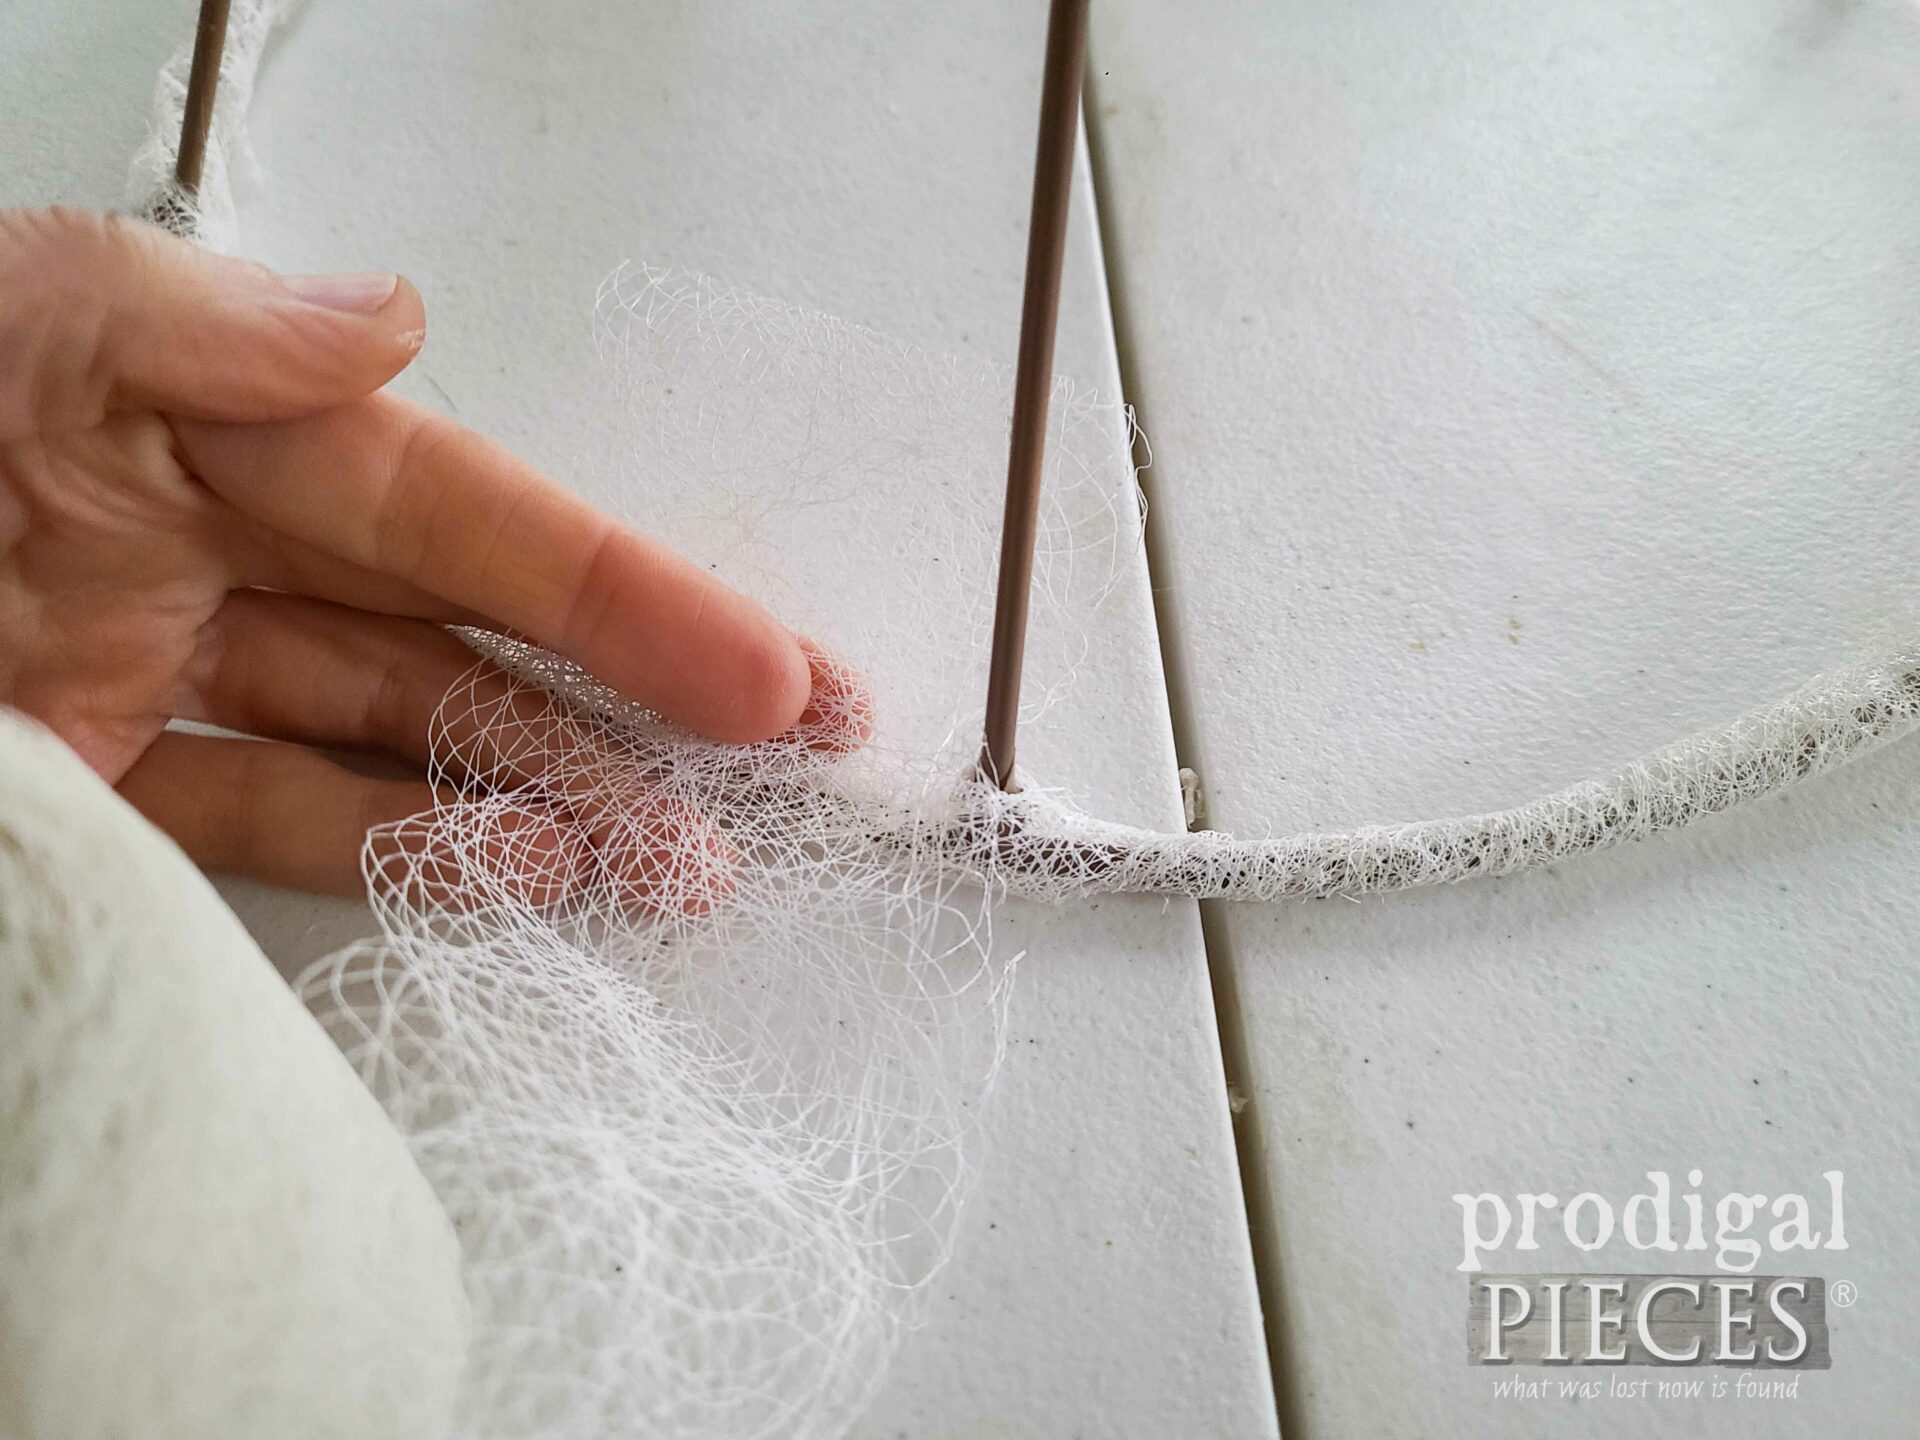 Wrapping Upcycled Lampshade Frame Cloche with Interfacing | prodigalpieces.com #prodigalpieces